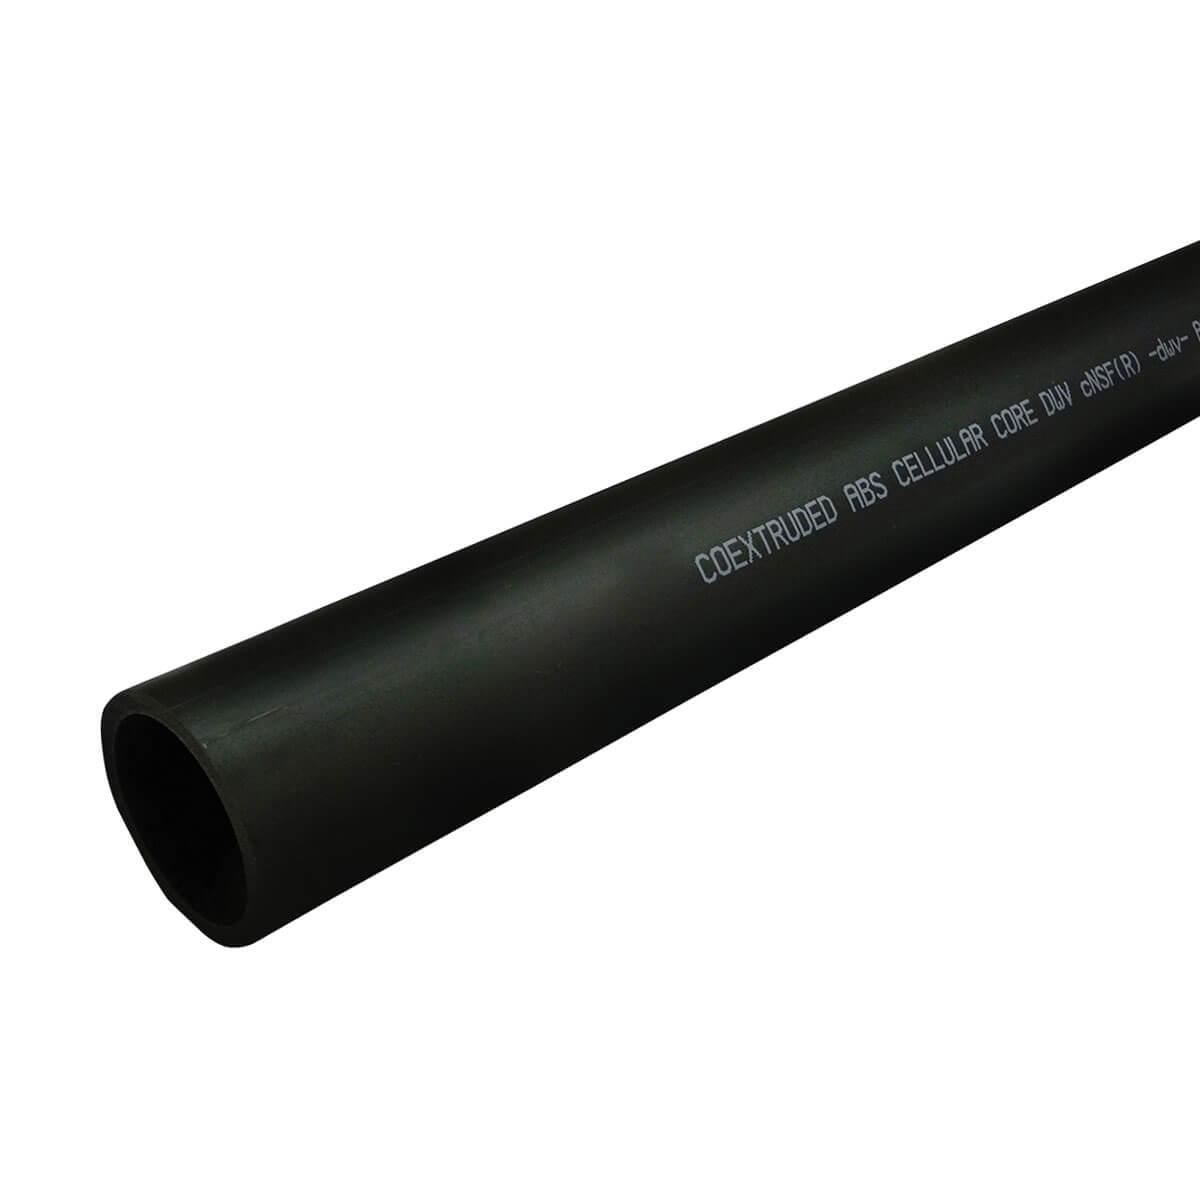 ABS Cell Core Pipe ASTM - 3-in x 12-ft